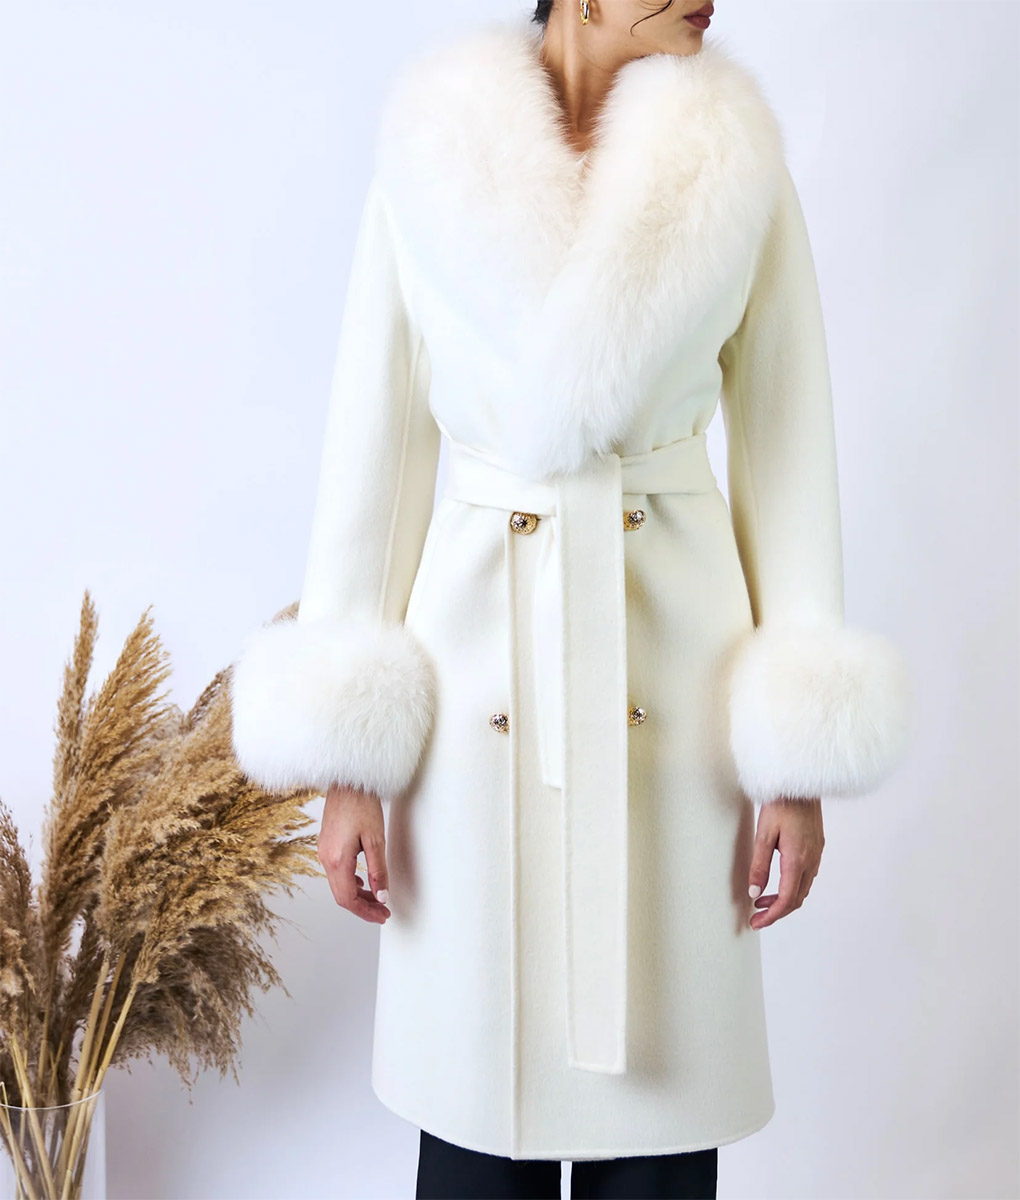 Leila Death and Other Details White Fur Coat (3)